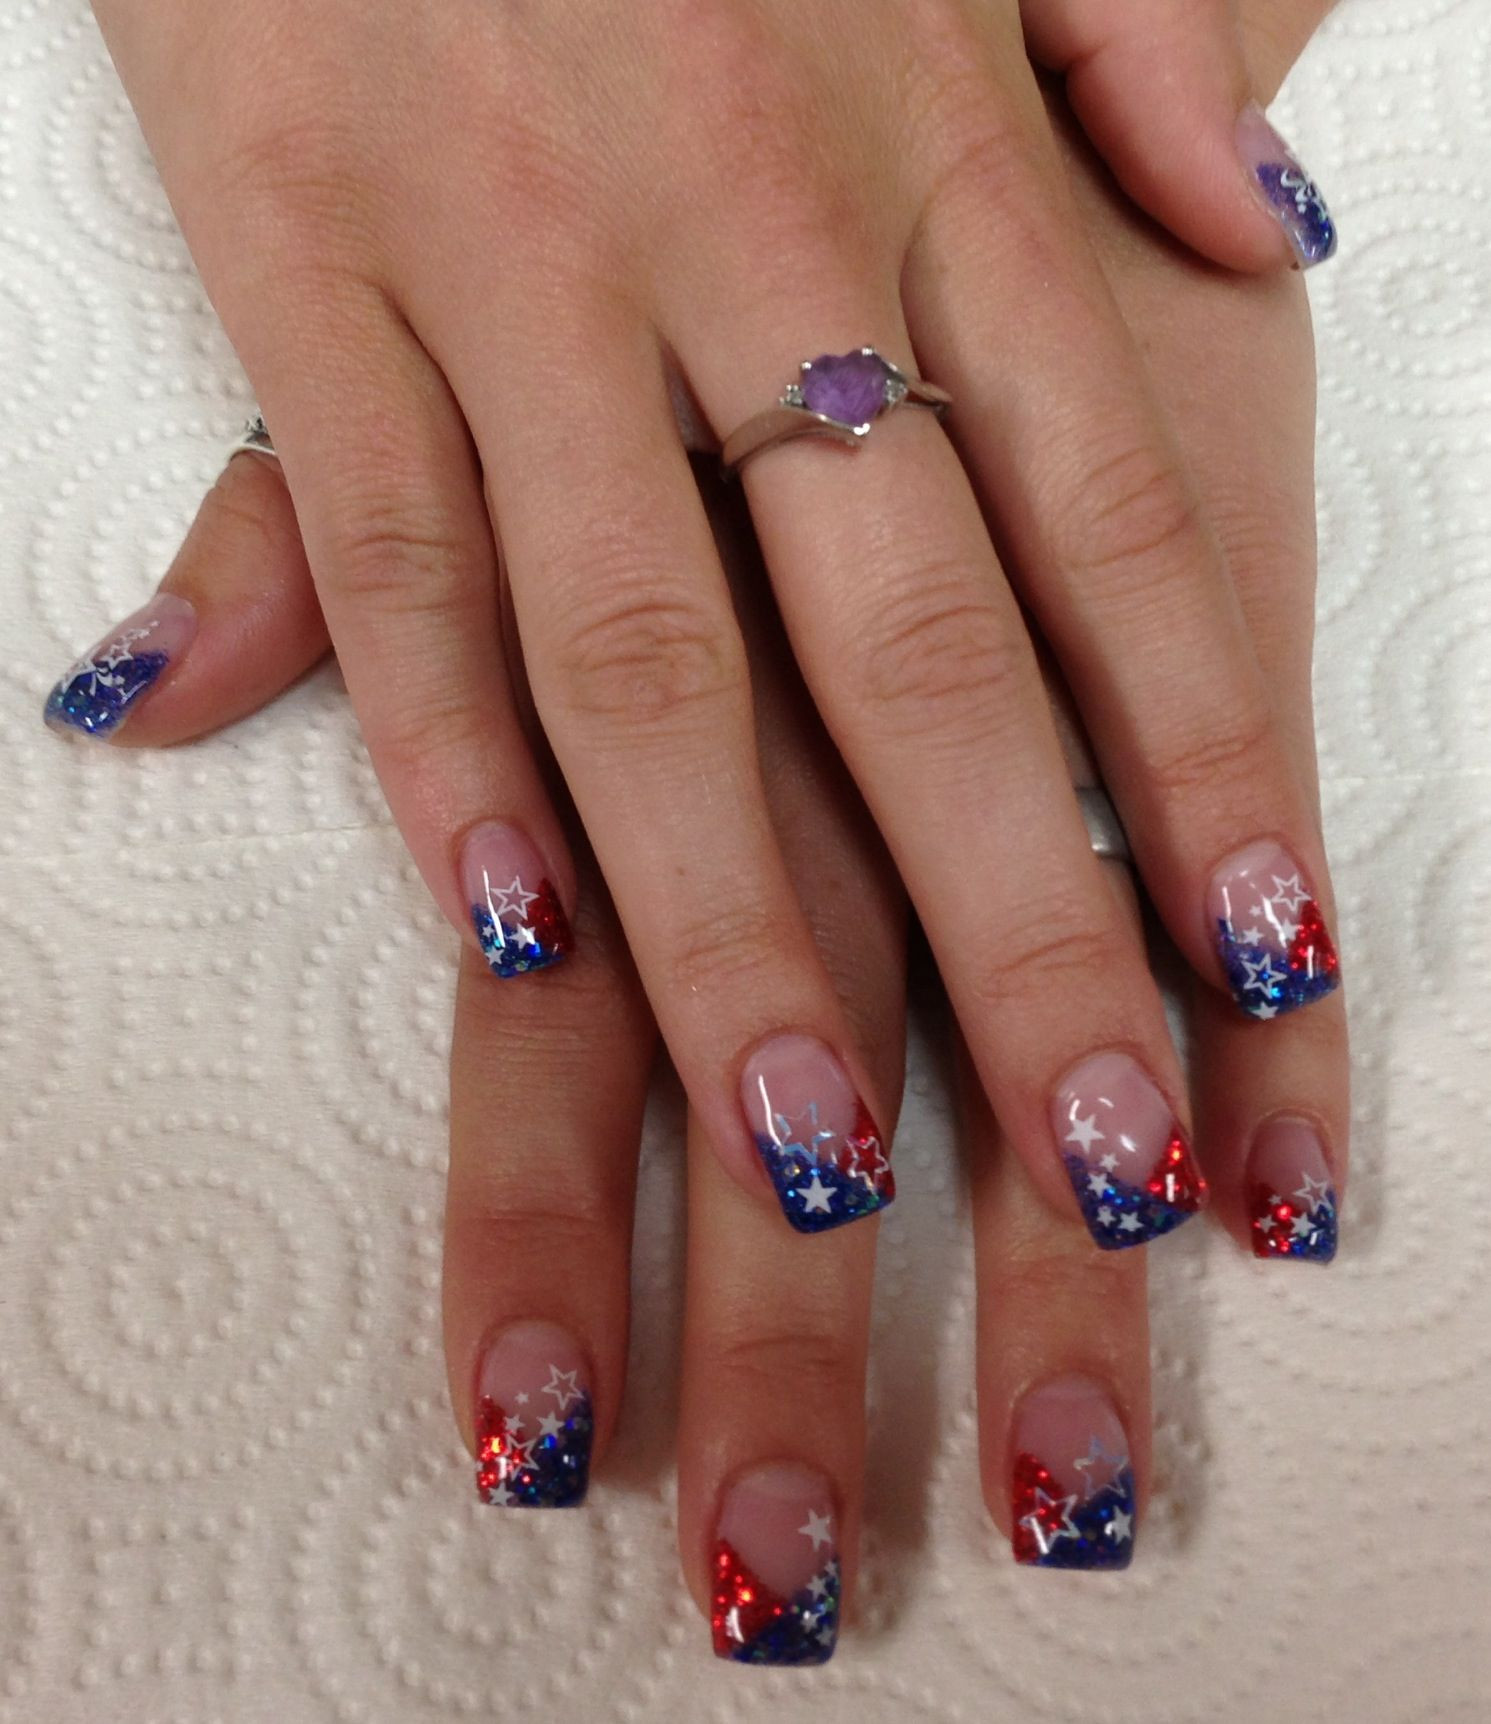 Red Gel Nail Designs
 American Red white & blue Gel Nails by Janee Tittensor